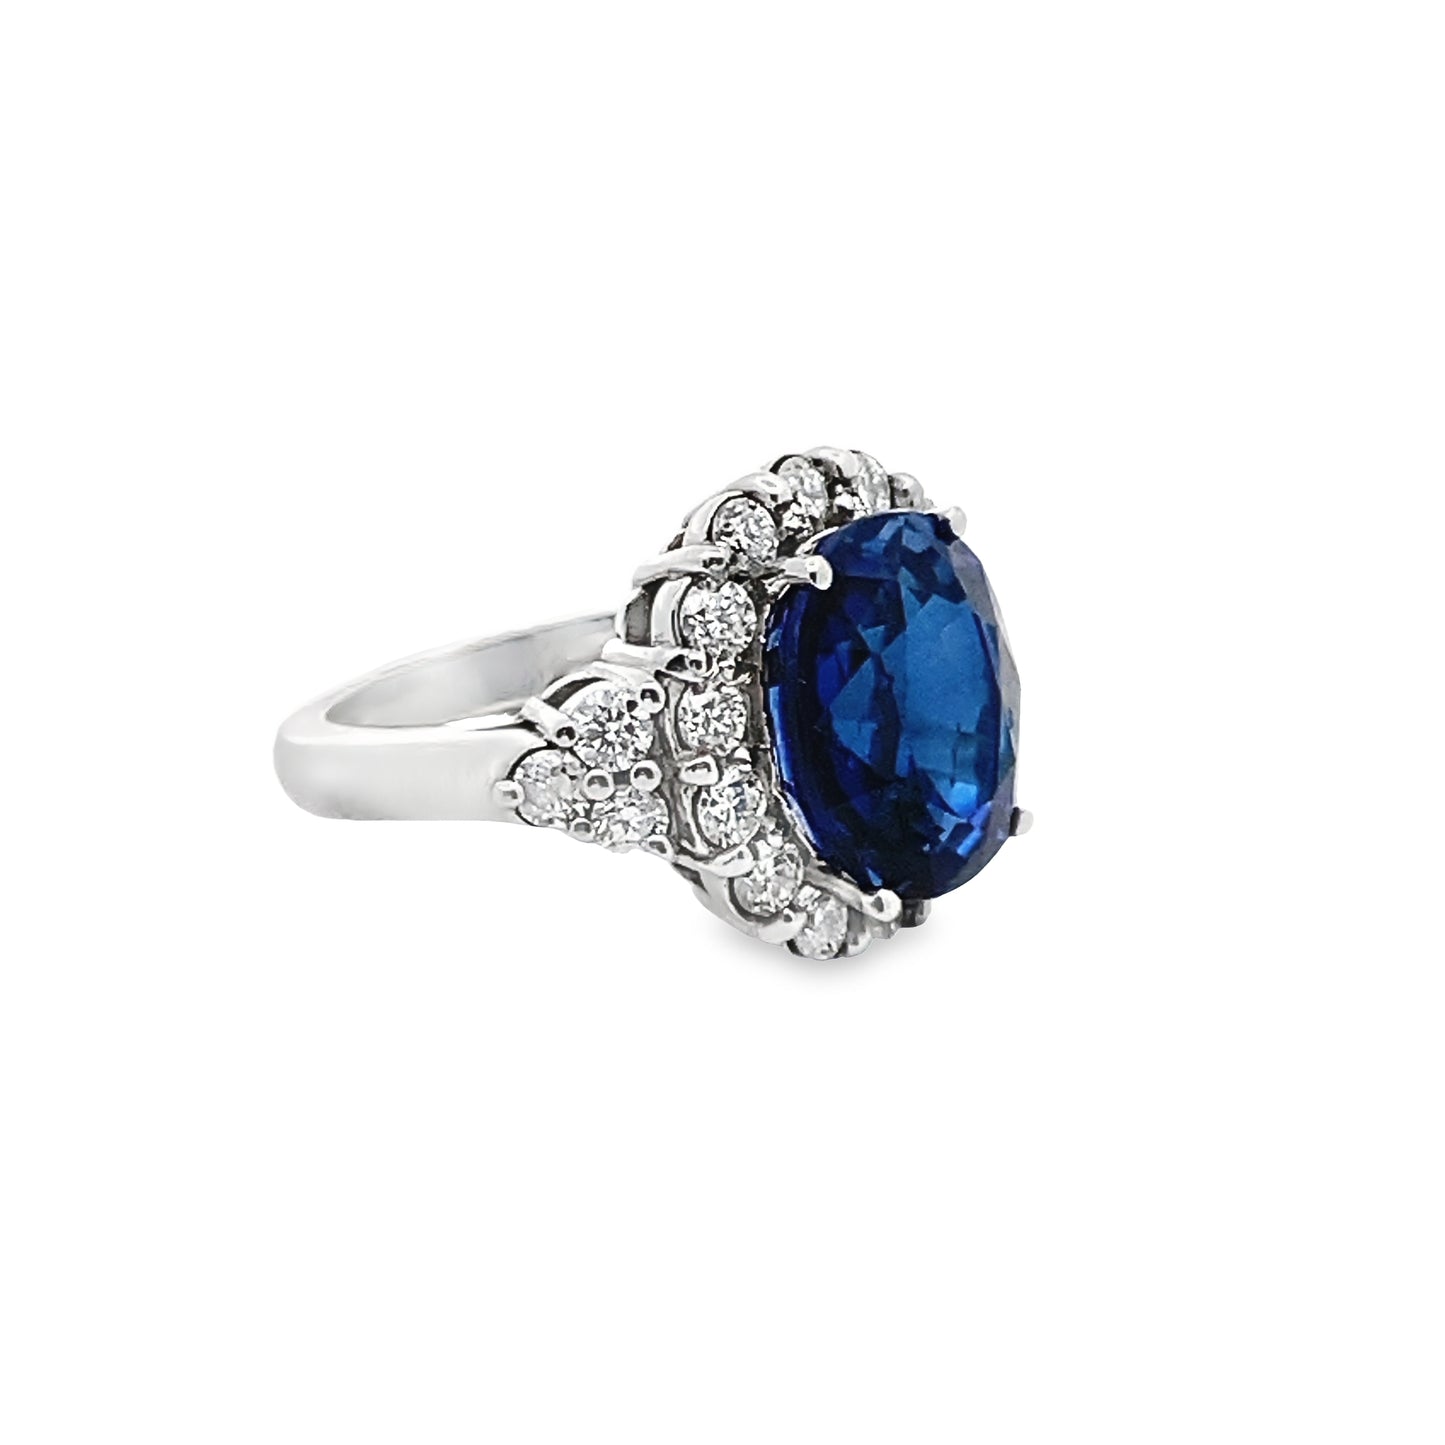 Prong-Set Oval Blue Sapphire Ring with Diamond Halo in 14K White Gold